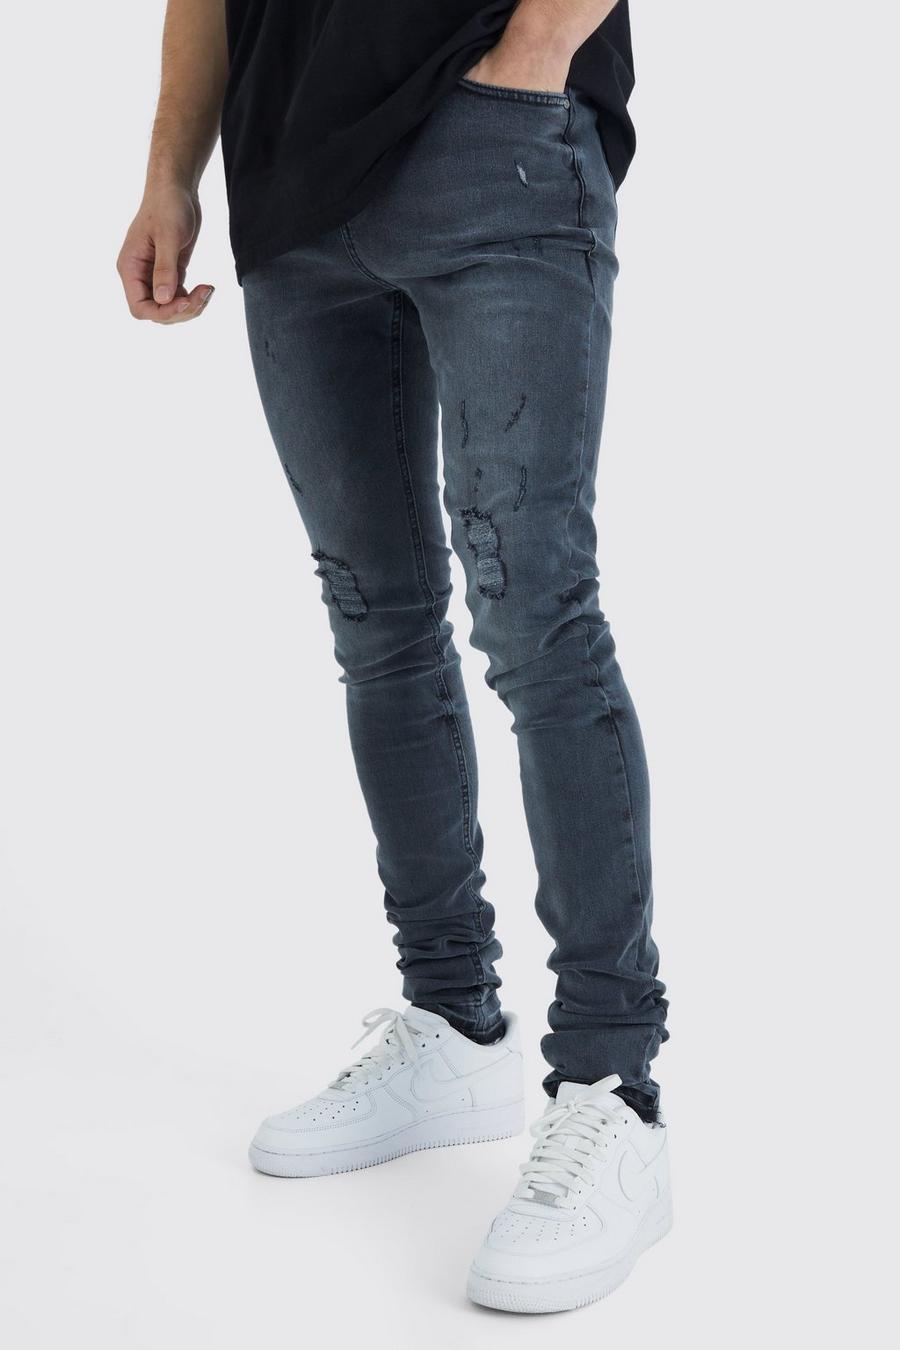 Tall Skinny Stacked Distressed Ripped Let Down Hem Jean | boohoo